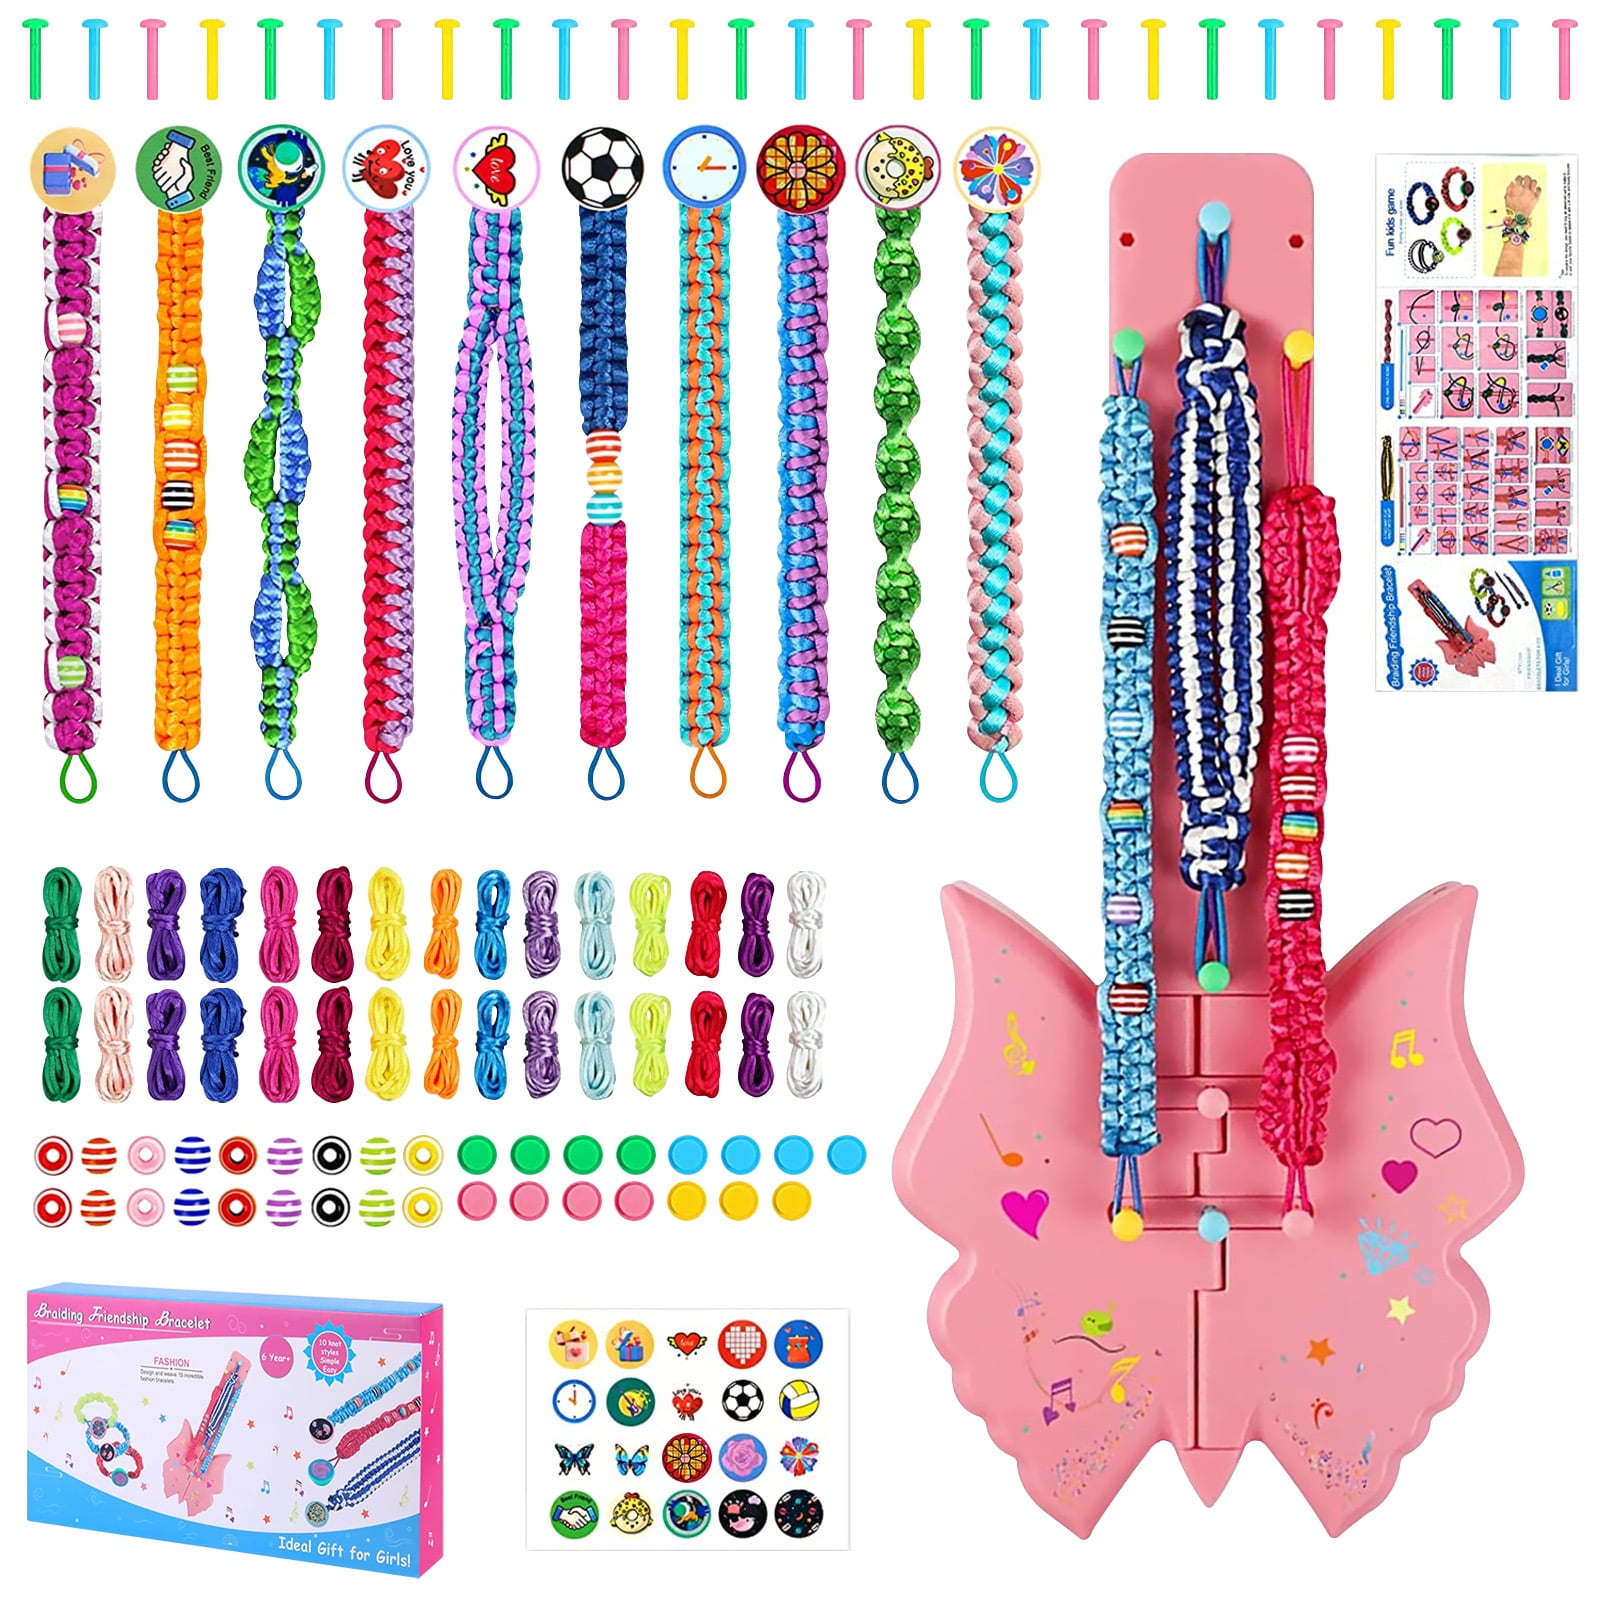  Spice Box Friendship Bracelet Making Kit for Girls, Kids Best  Friend DIY String Jewelry, Arts and Crafts Activity Set for Children,  Multicolor (7410) : Arts, Crafts & Sewing